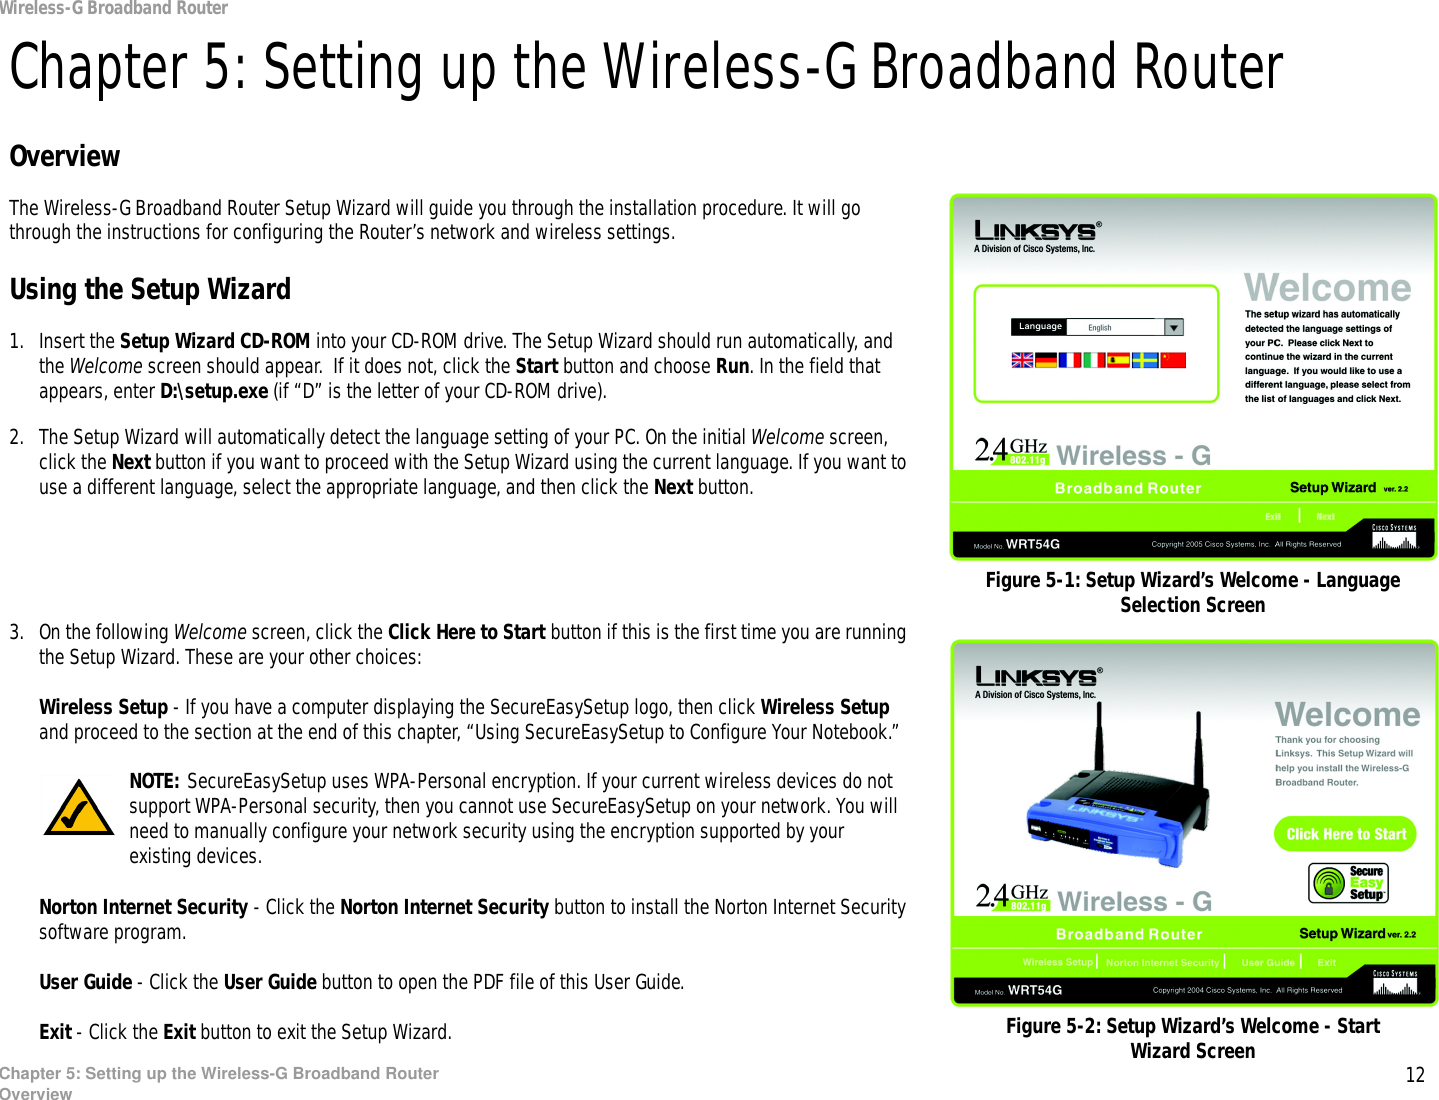 12Chapter 5: Setting up the Wireless-G Broadband RouterOverviewWireless-G Broadband RouterChapter 5: Setting up the Wireless-G Broadband RouterOverviewThe Wireless-G Broadband Router Setup Wizard will guide you through the installation procedure. It will go through the instructions for configuring the Router’s network and wireless settings.Using the Setup Wizard1. Insert the Setup Wizard CD-ROM into your CD-ROM drive. The Setup Wizard should run automatically, and the Welcome screen should appear.  If it does not, click the Start button and choose Run. In the field that appears, enter D:\setup.exe (if “D” is the letter of your CD-ROM drive).2. The Setup Wizard will automatically detect the language setting of your PC. On the initial Welcome screen, click the Next button if you want to proceed with the Setup Wizard using the current language. If you want to use a different language, select the appropriate language, and then click the Next button.3. On the following Welcome screen, click the Click Here to Start button if this is the first time you are running the Setup Wizard. These are your other choices:Wireless Setup - If you have a computer displaying the SecureEasySetup logo, then click Wireless Setup and proceed to the section at the end of this chapter, “Using SecureEasySetup to Configure Your Notebook.”Norton Internet Security - Click the Norton Internet Security button to install the Norton Internet Security software program. User Guide - Click the User Guide button to open the PDF file of this User Guide.Exit - Click the Exit button to exit the Setup Wizard.Figure 5-1: Setup Wizard’s Welcome - Language Selection ScreenFigure 5-2: Setup Wizard’s Welcome - Start Wizard ScreenNOTE: SecureEasySetup uses WPA-Personal encryption. If your current wireless devices do not support WPA-Personal security, then you cannot use SecureEasySetup on your network. You will need to manually configure your network security using the encryption supported by your existing devices.